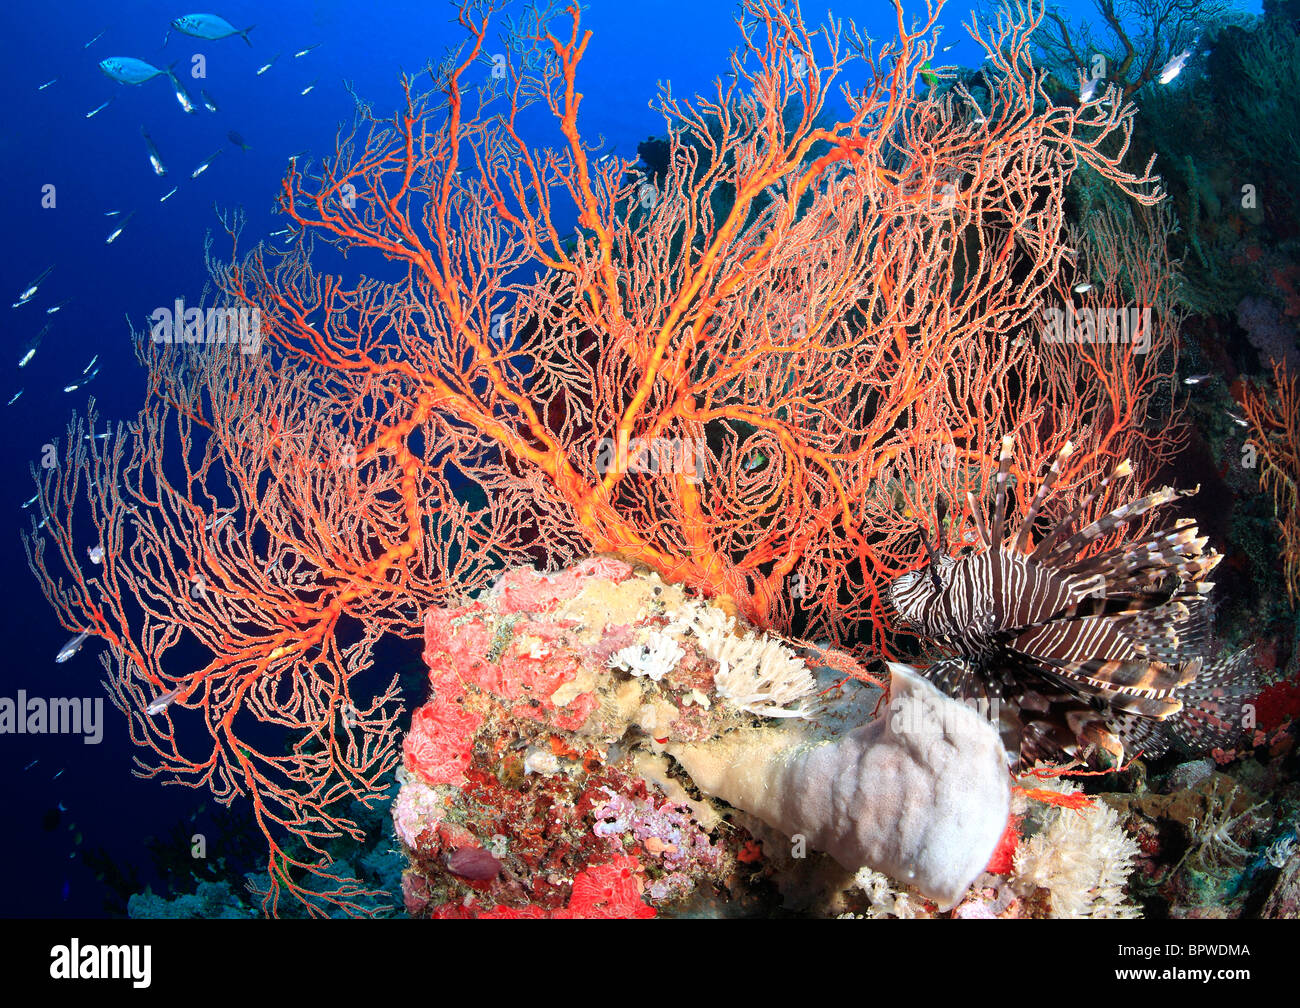 a  colorful reef scene with red sea fans, tropical fish and a lionfish, with a blue water background, Stock Photo